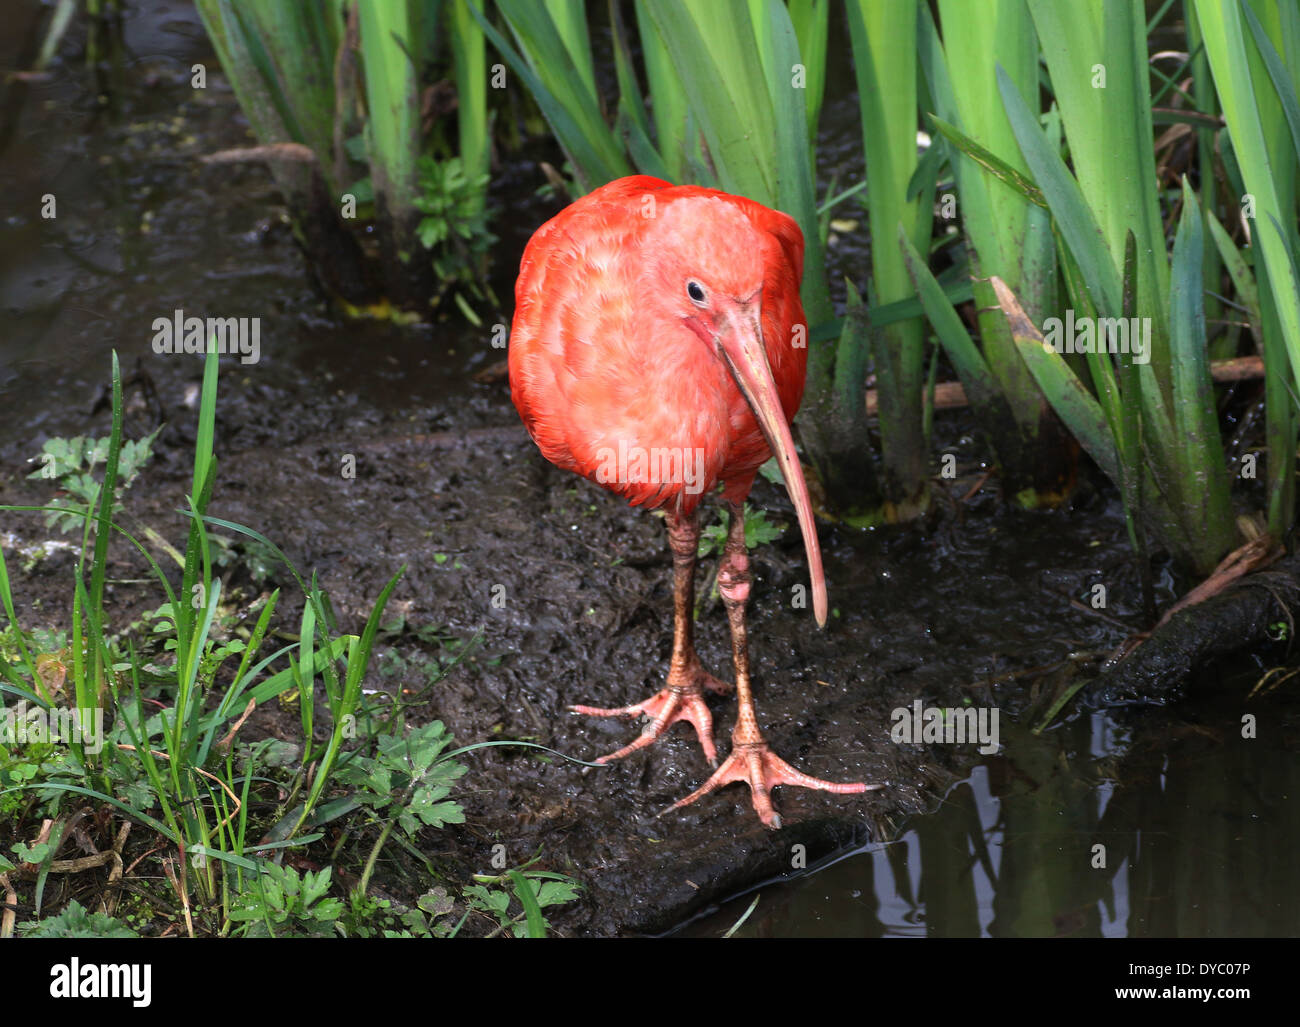 Close-up of a Scarlet Ibis (Eudocimus ruber) foraging near a lake Stock Photo